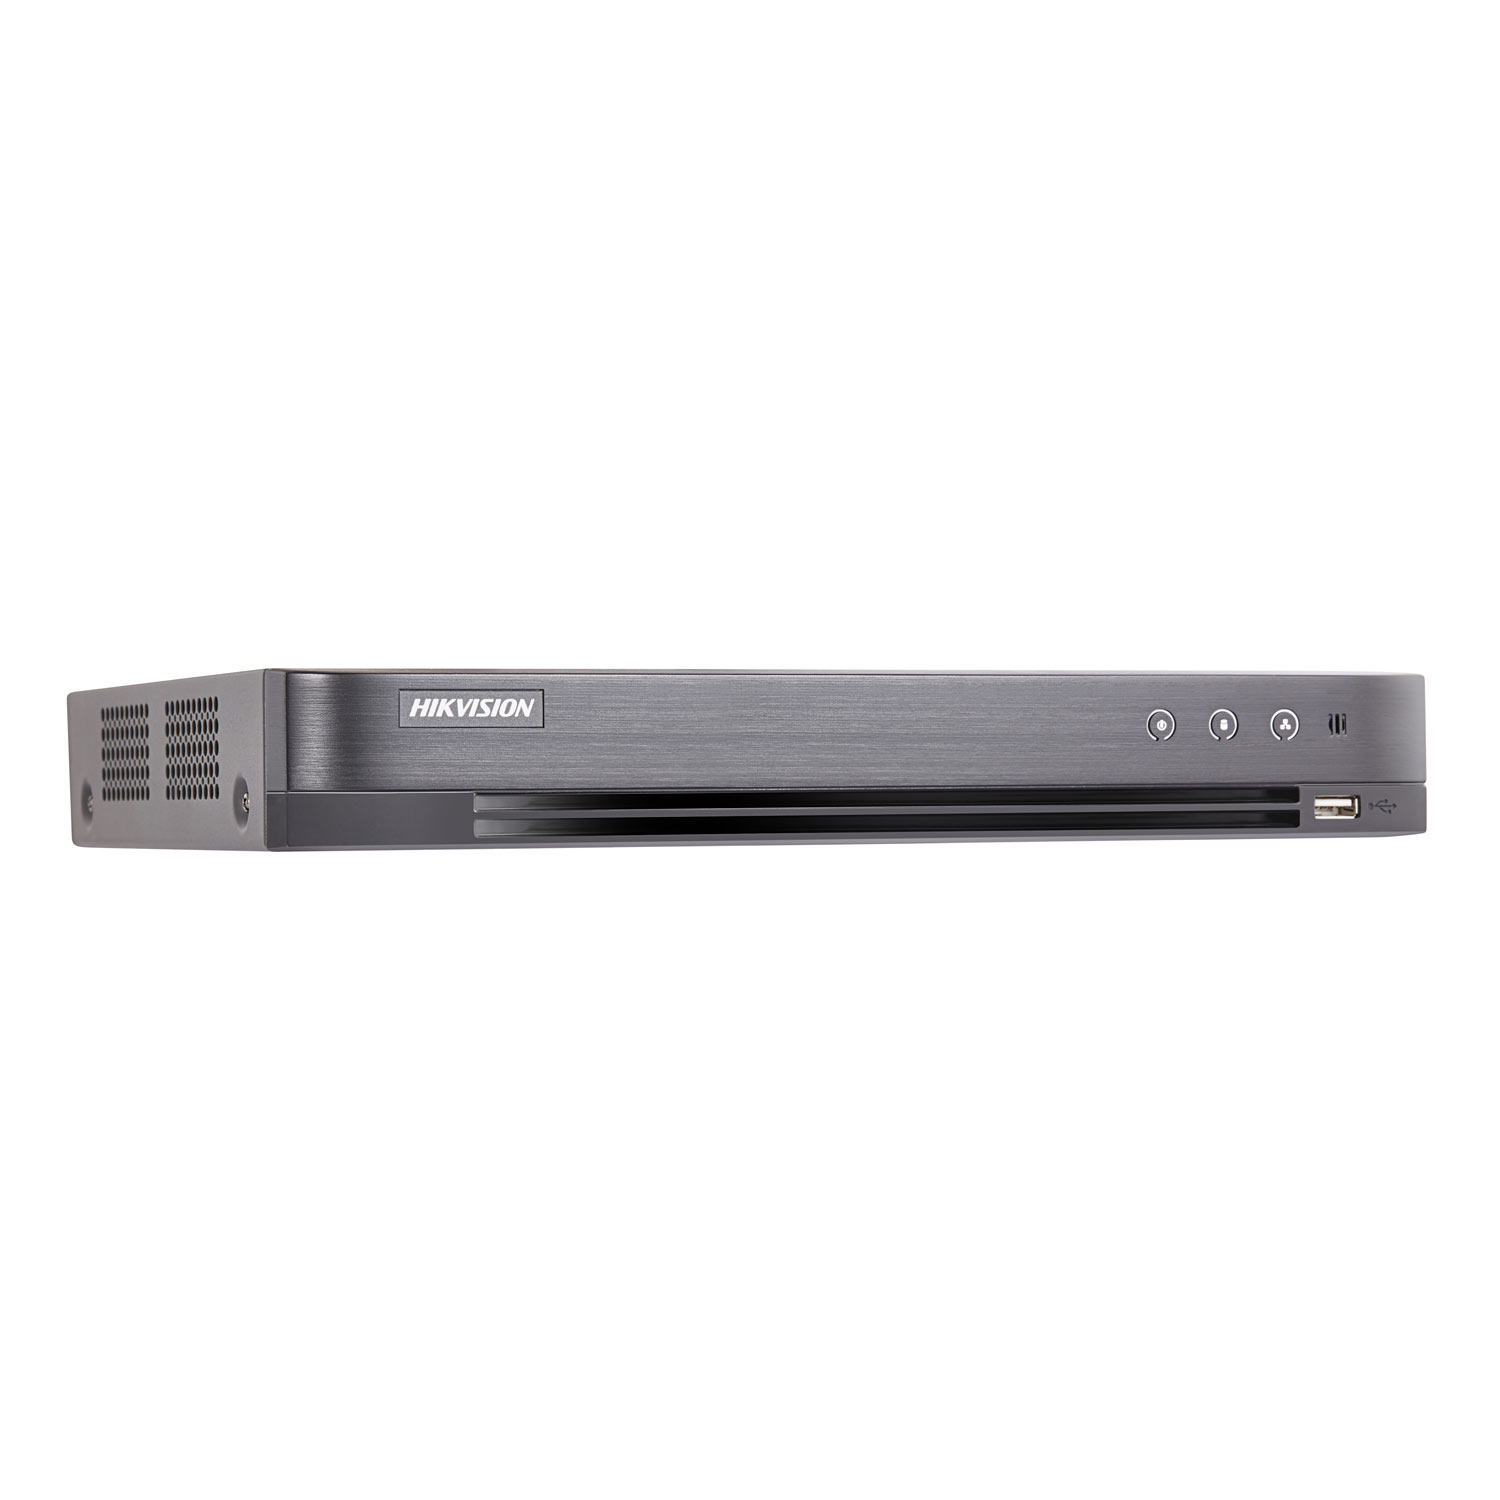 DVR HikVision Turbo HD DS-7204HTHI-K1, 4 canale, 8 MP, audio prin coaxial Hikvision imagine 2022